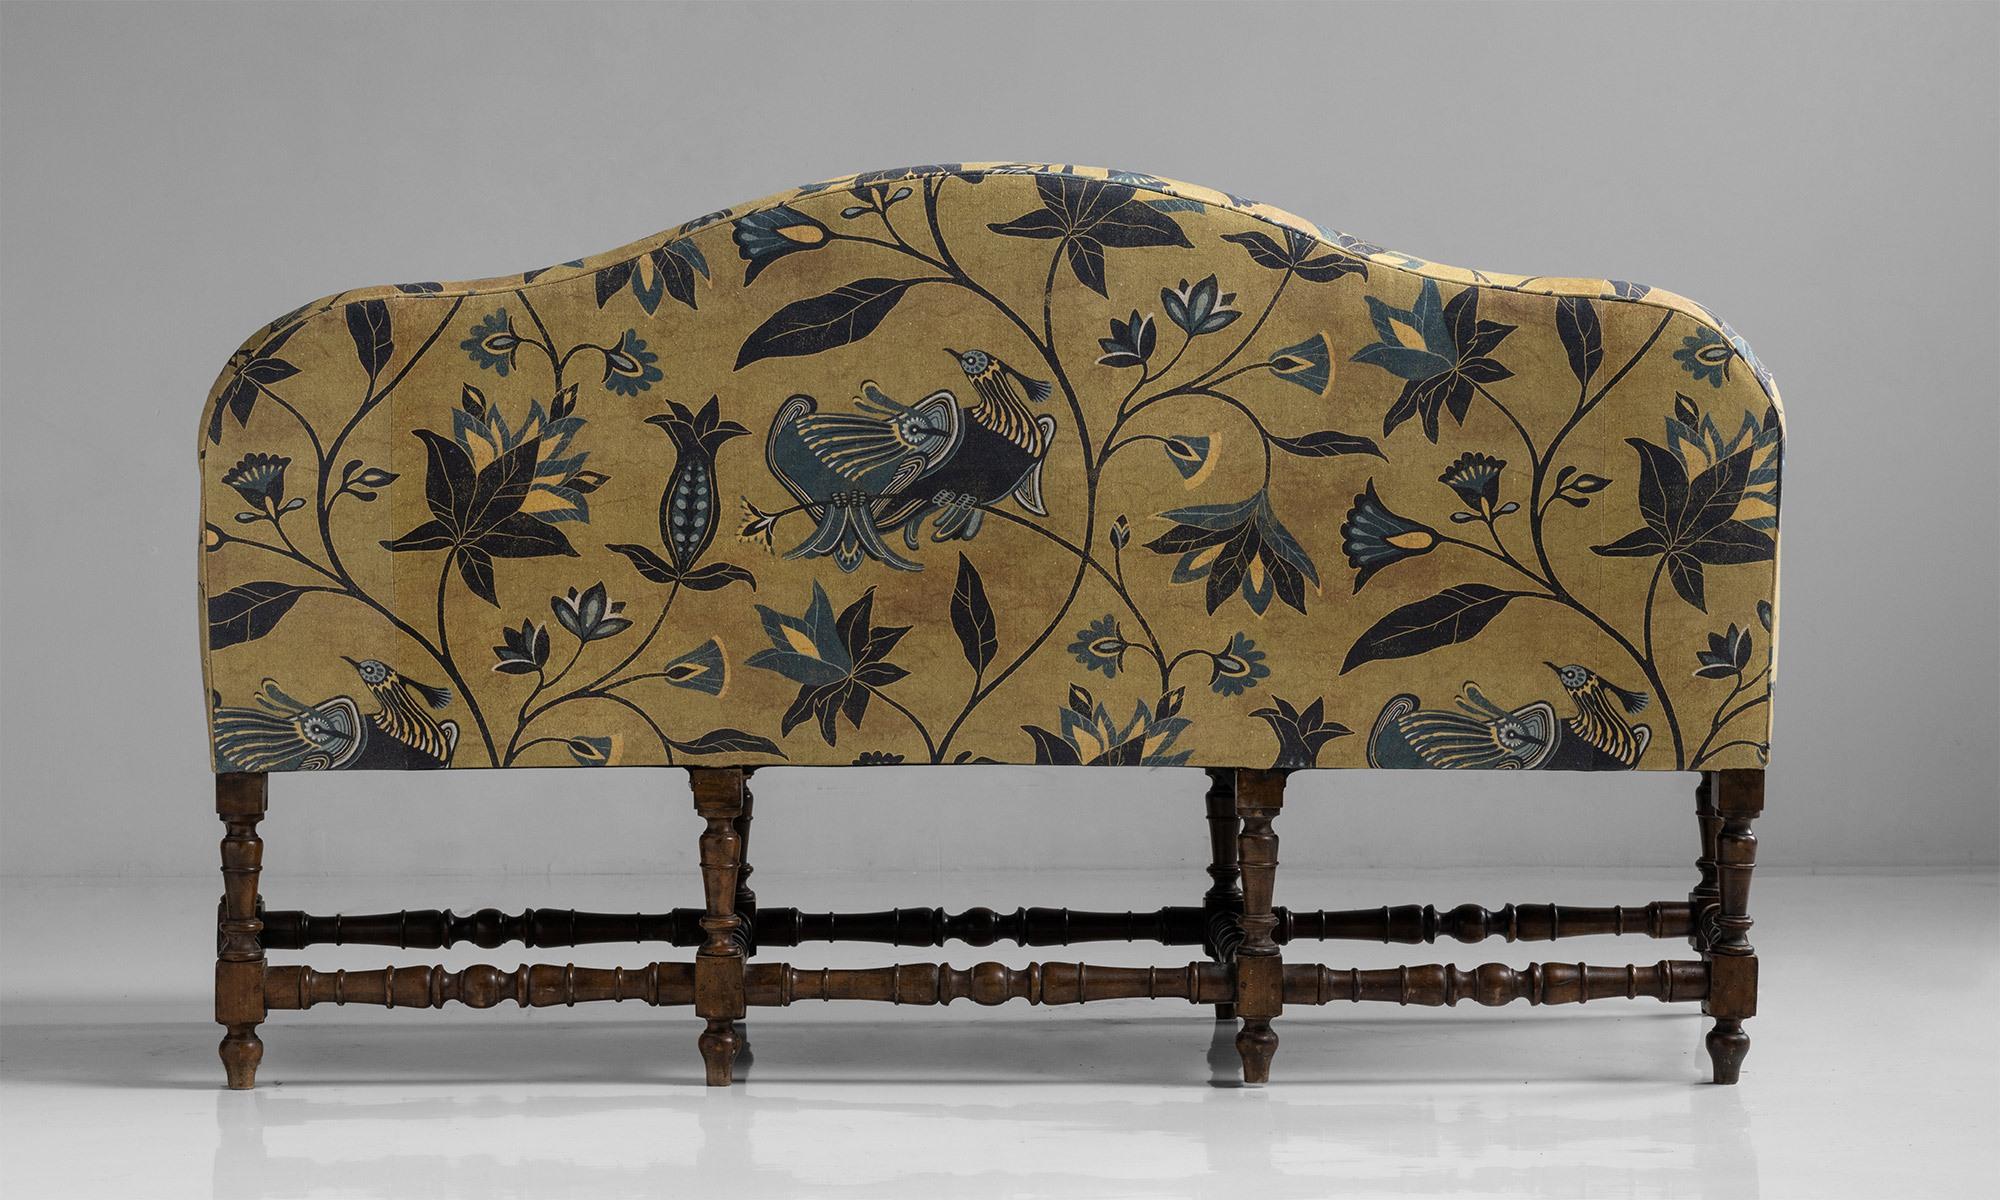 Cotton Camelback Sofa in Linen Floral Print by James Malone, Italy, Circa 1860